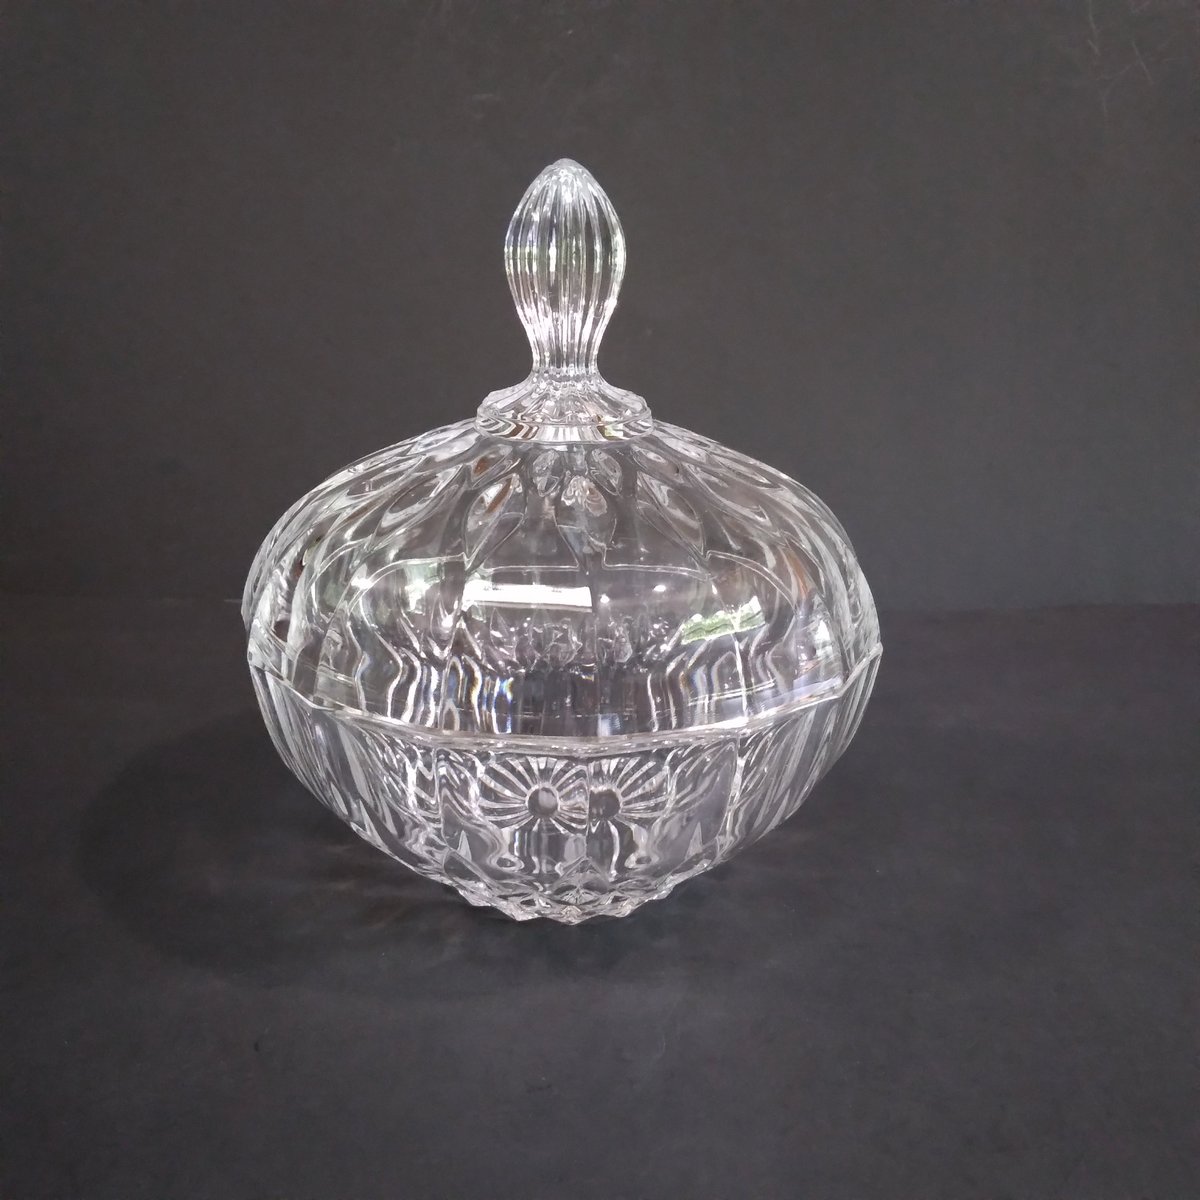 Today's featured listing in my #EtsyShop: Vintage Clear Glass Candy Dish, SO Pretty!  Click link to #Shop:  etsy.me/46W787s   #crystalcandydish  #shabbychicmotif #shabbychicdecor #mcmcandydish #Glass #NualasNiftyThrifties #Etsy #EtsyGifts #EtsyFinds